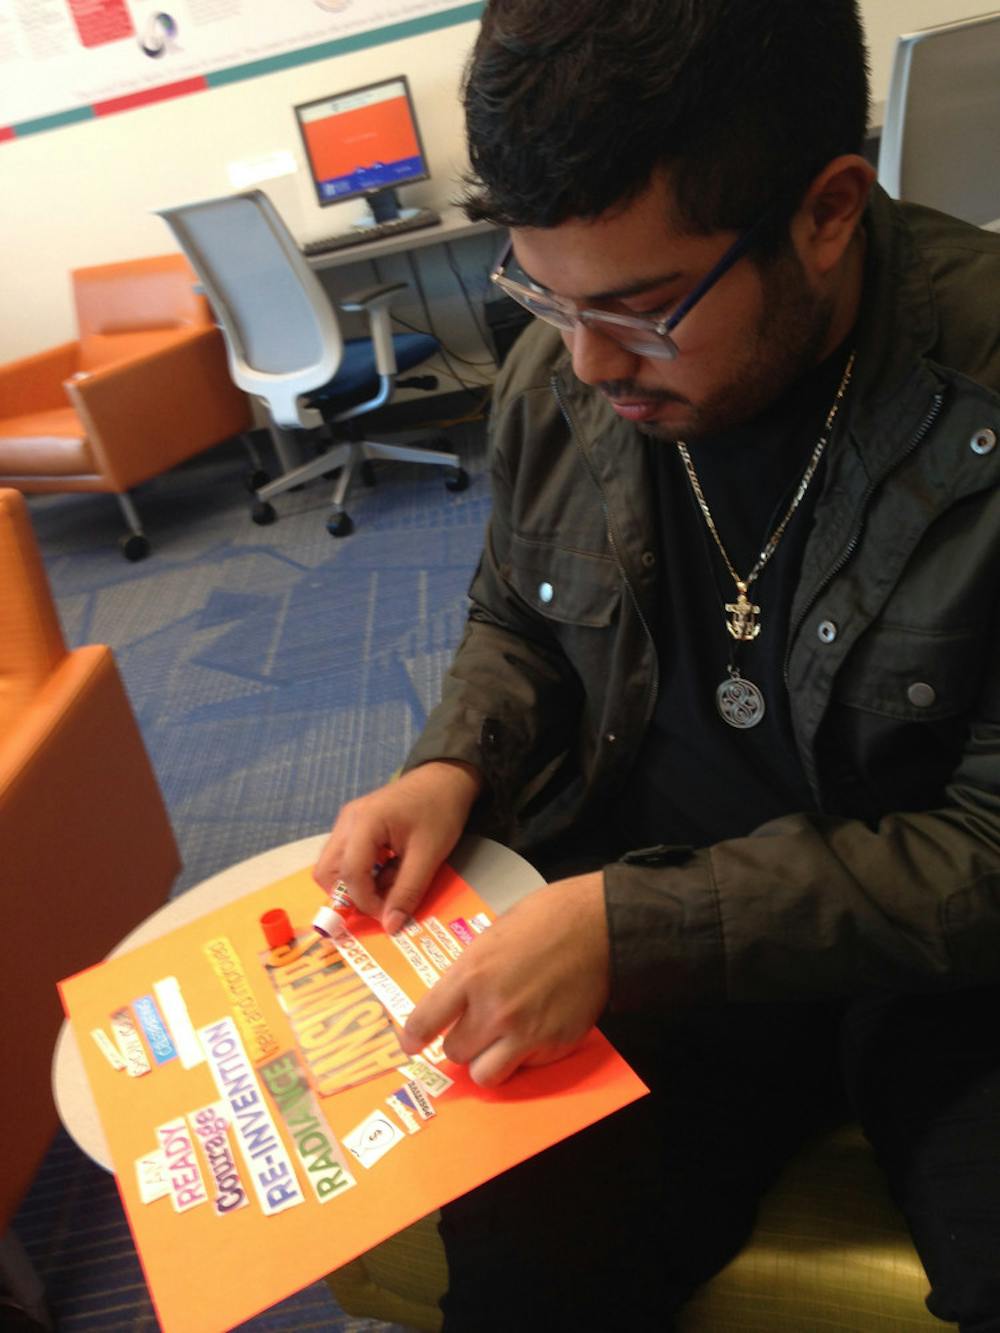 <p dir="ltr"><span>Cristian Laureano, a 20-year-old UF criminology senior, pastes cut-out magazine headlines onto a collage representing his New Year’s resolution to improve all aspects of his life. Laureano was participating in Multicultural and Diversity Affairs “Decolonizing New Year’s Resolutions” event on Monday from 2 p.m. to 4 p.m.</span></p><p><span> </span></p>